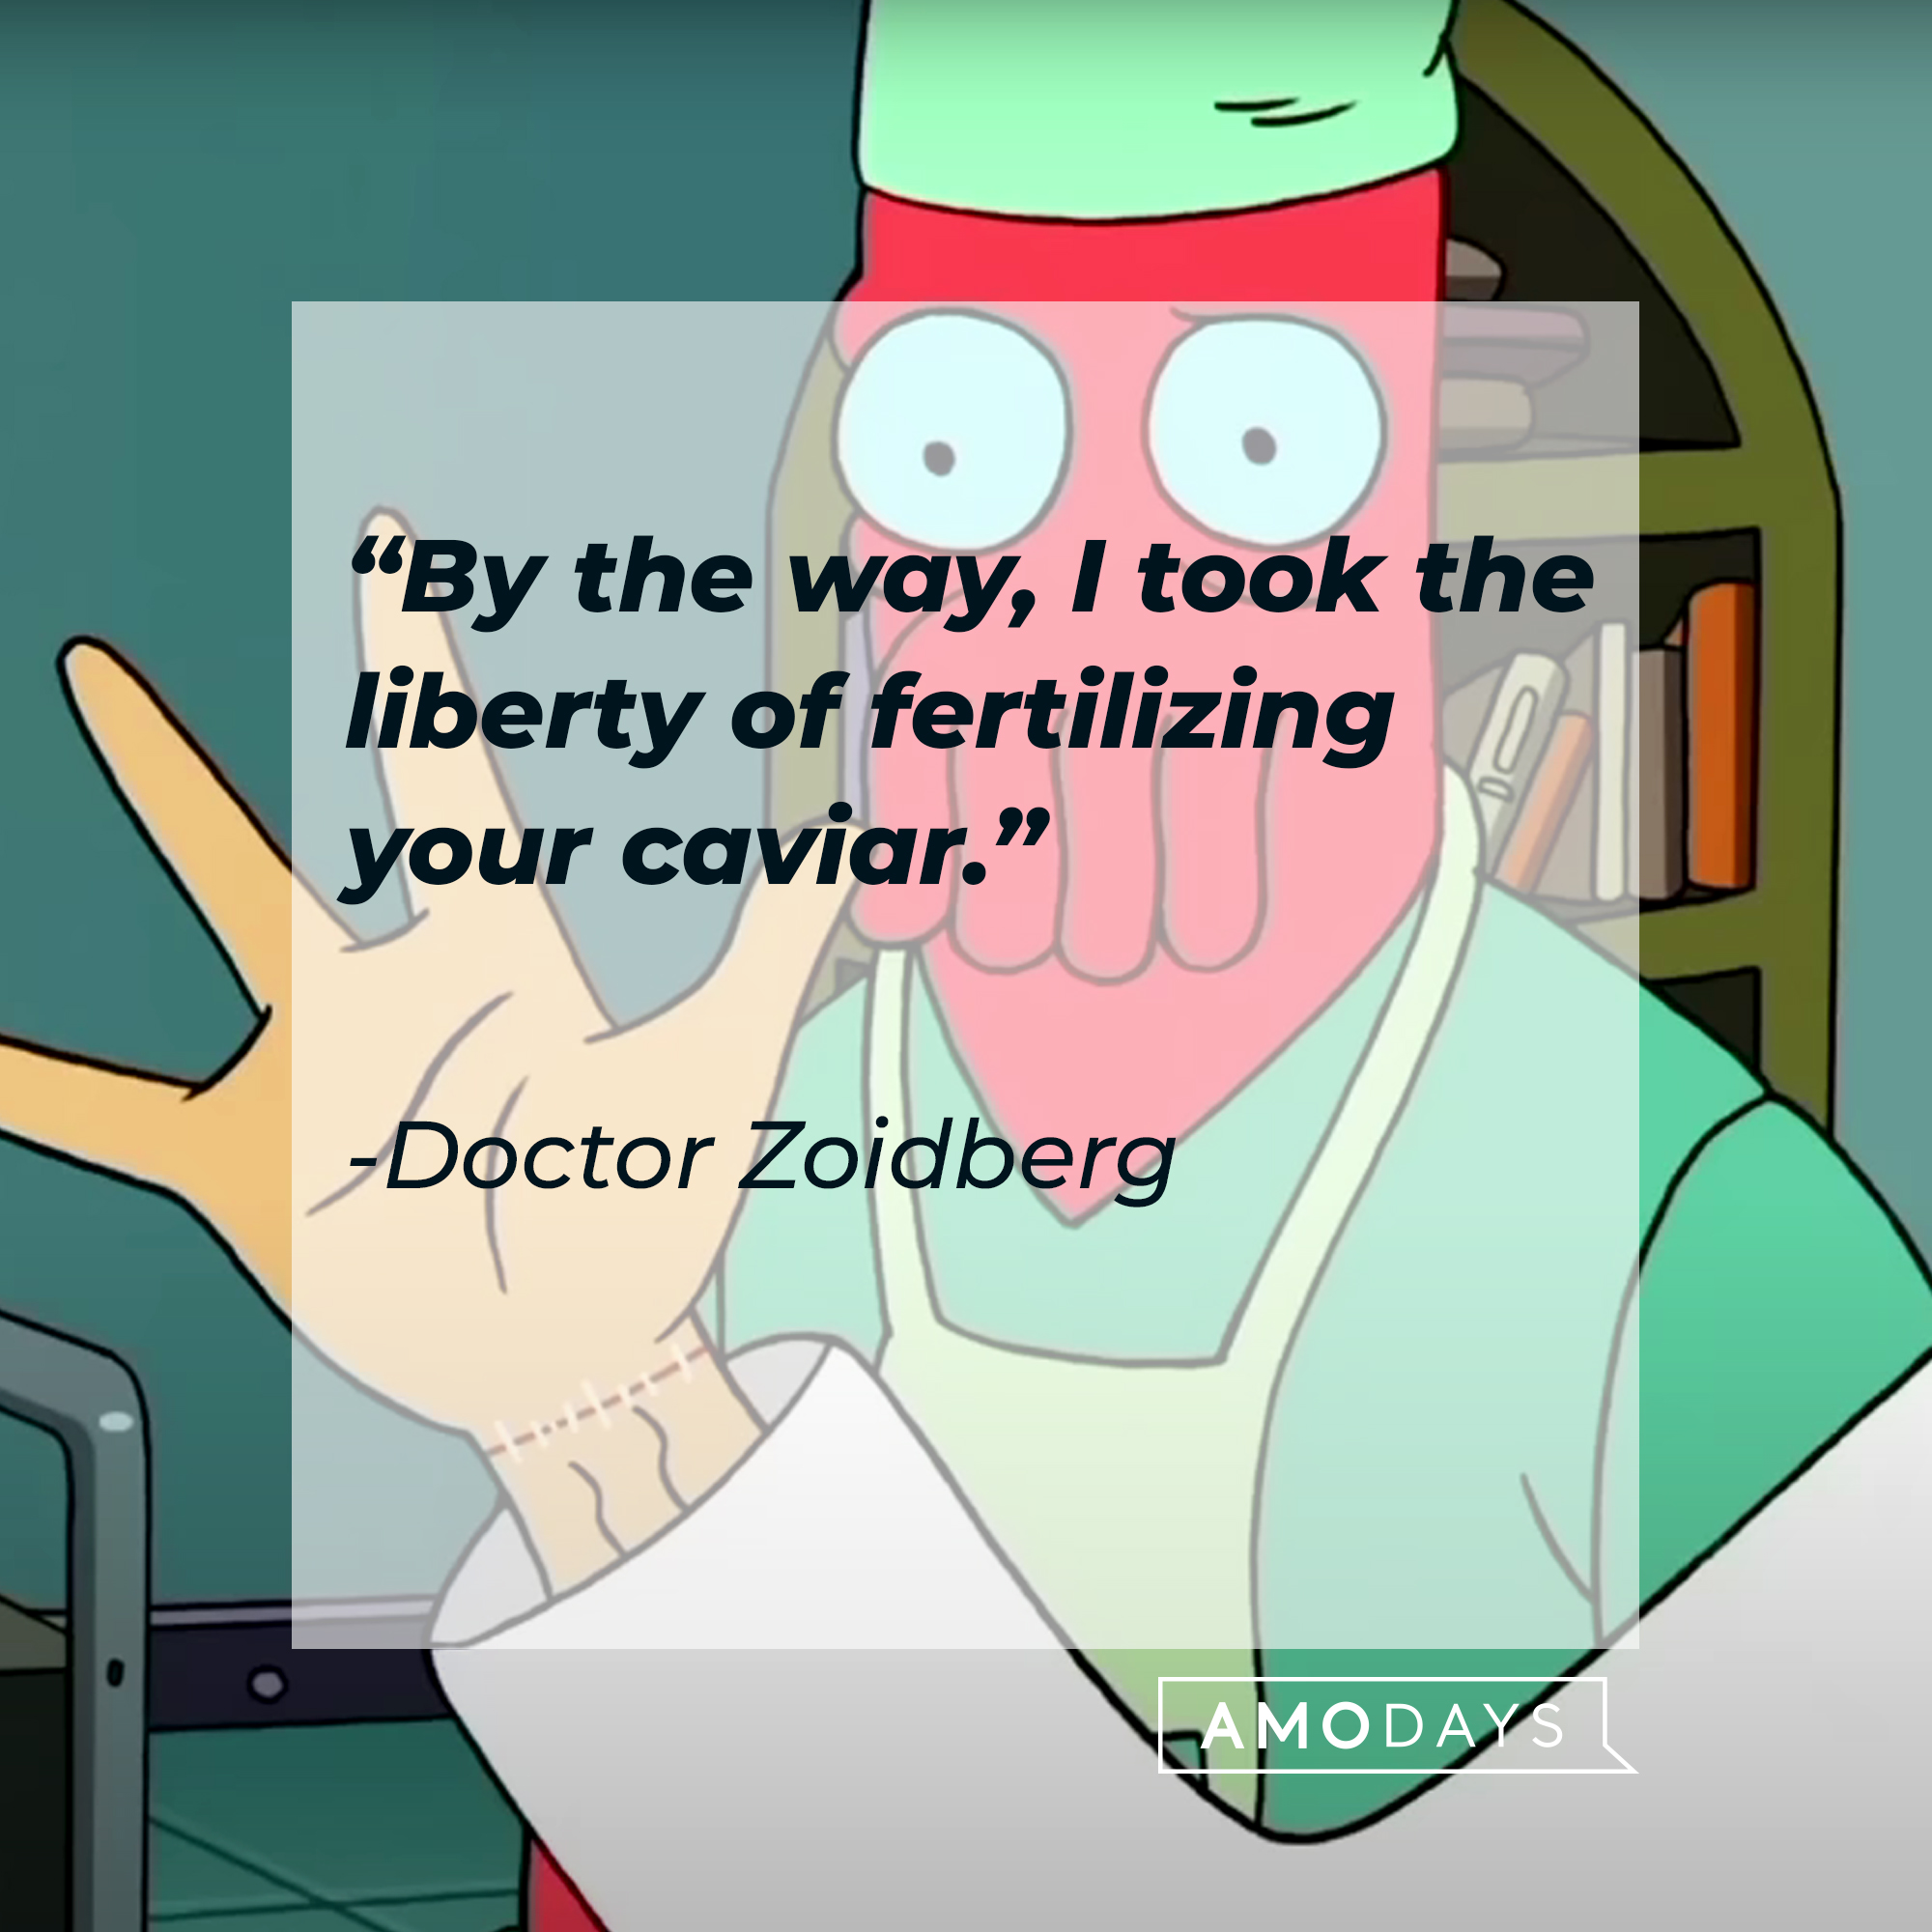 Doctor Zoidberg, with his quote: “By the way, I took the liberty of fertilizing your caviar.” | Source:  facebook.com/Futurama